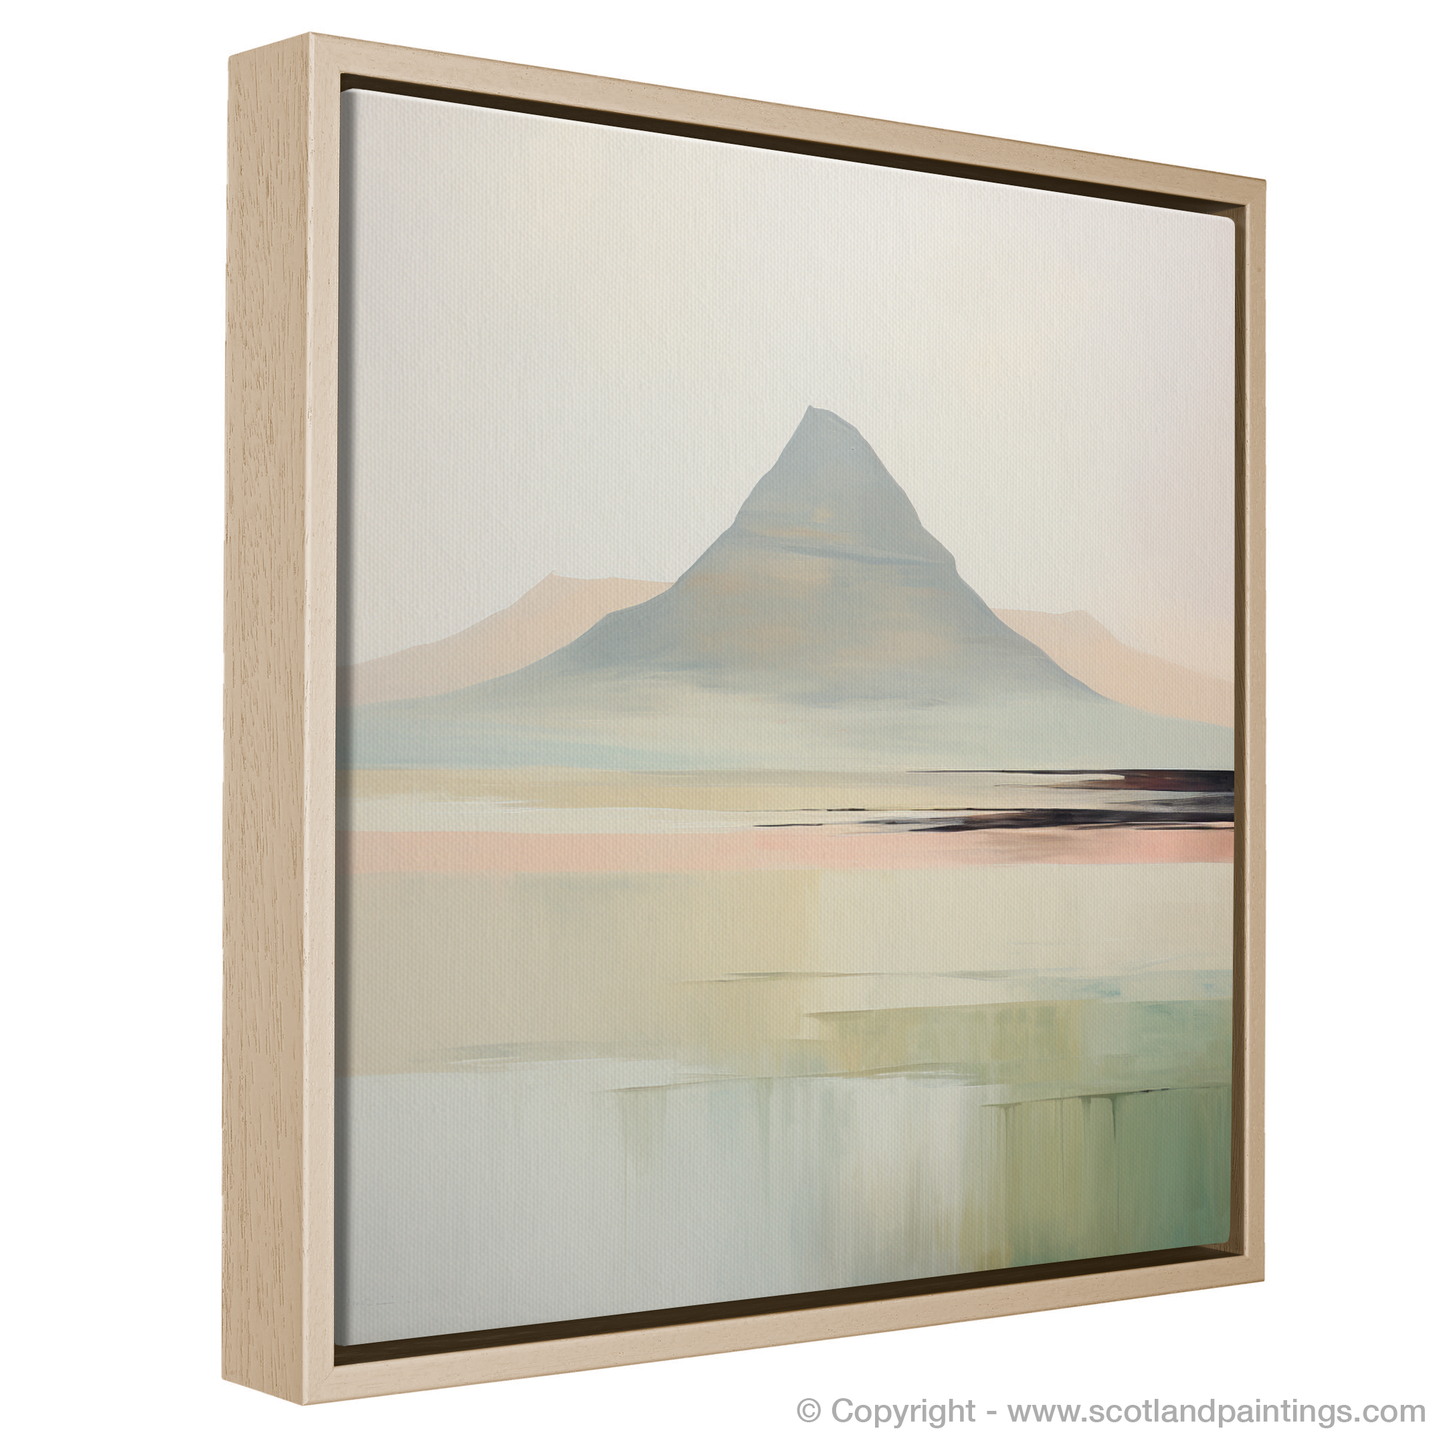 Painting and Art Print of Càrn an t-Sagairt Mòr entitled "Abstract Highland Serenity: An Ode to Càrn an t-Sagairt Mòr".